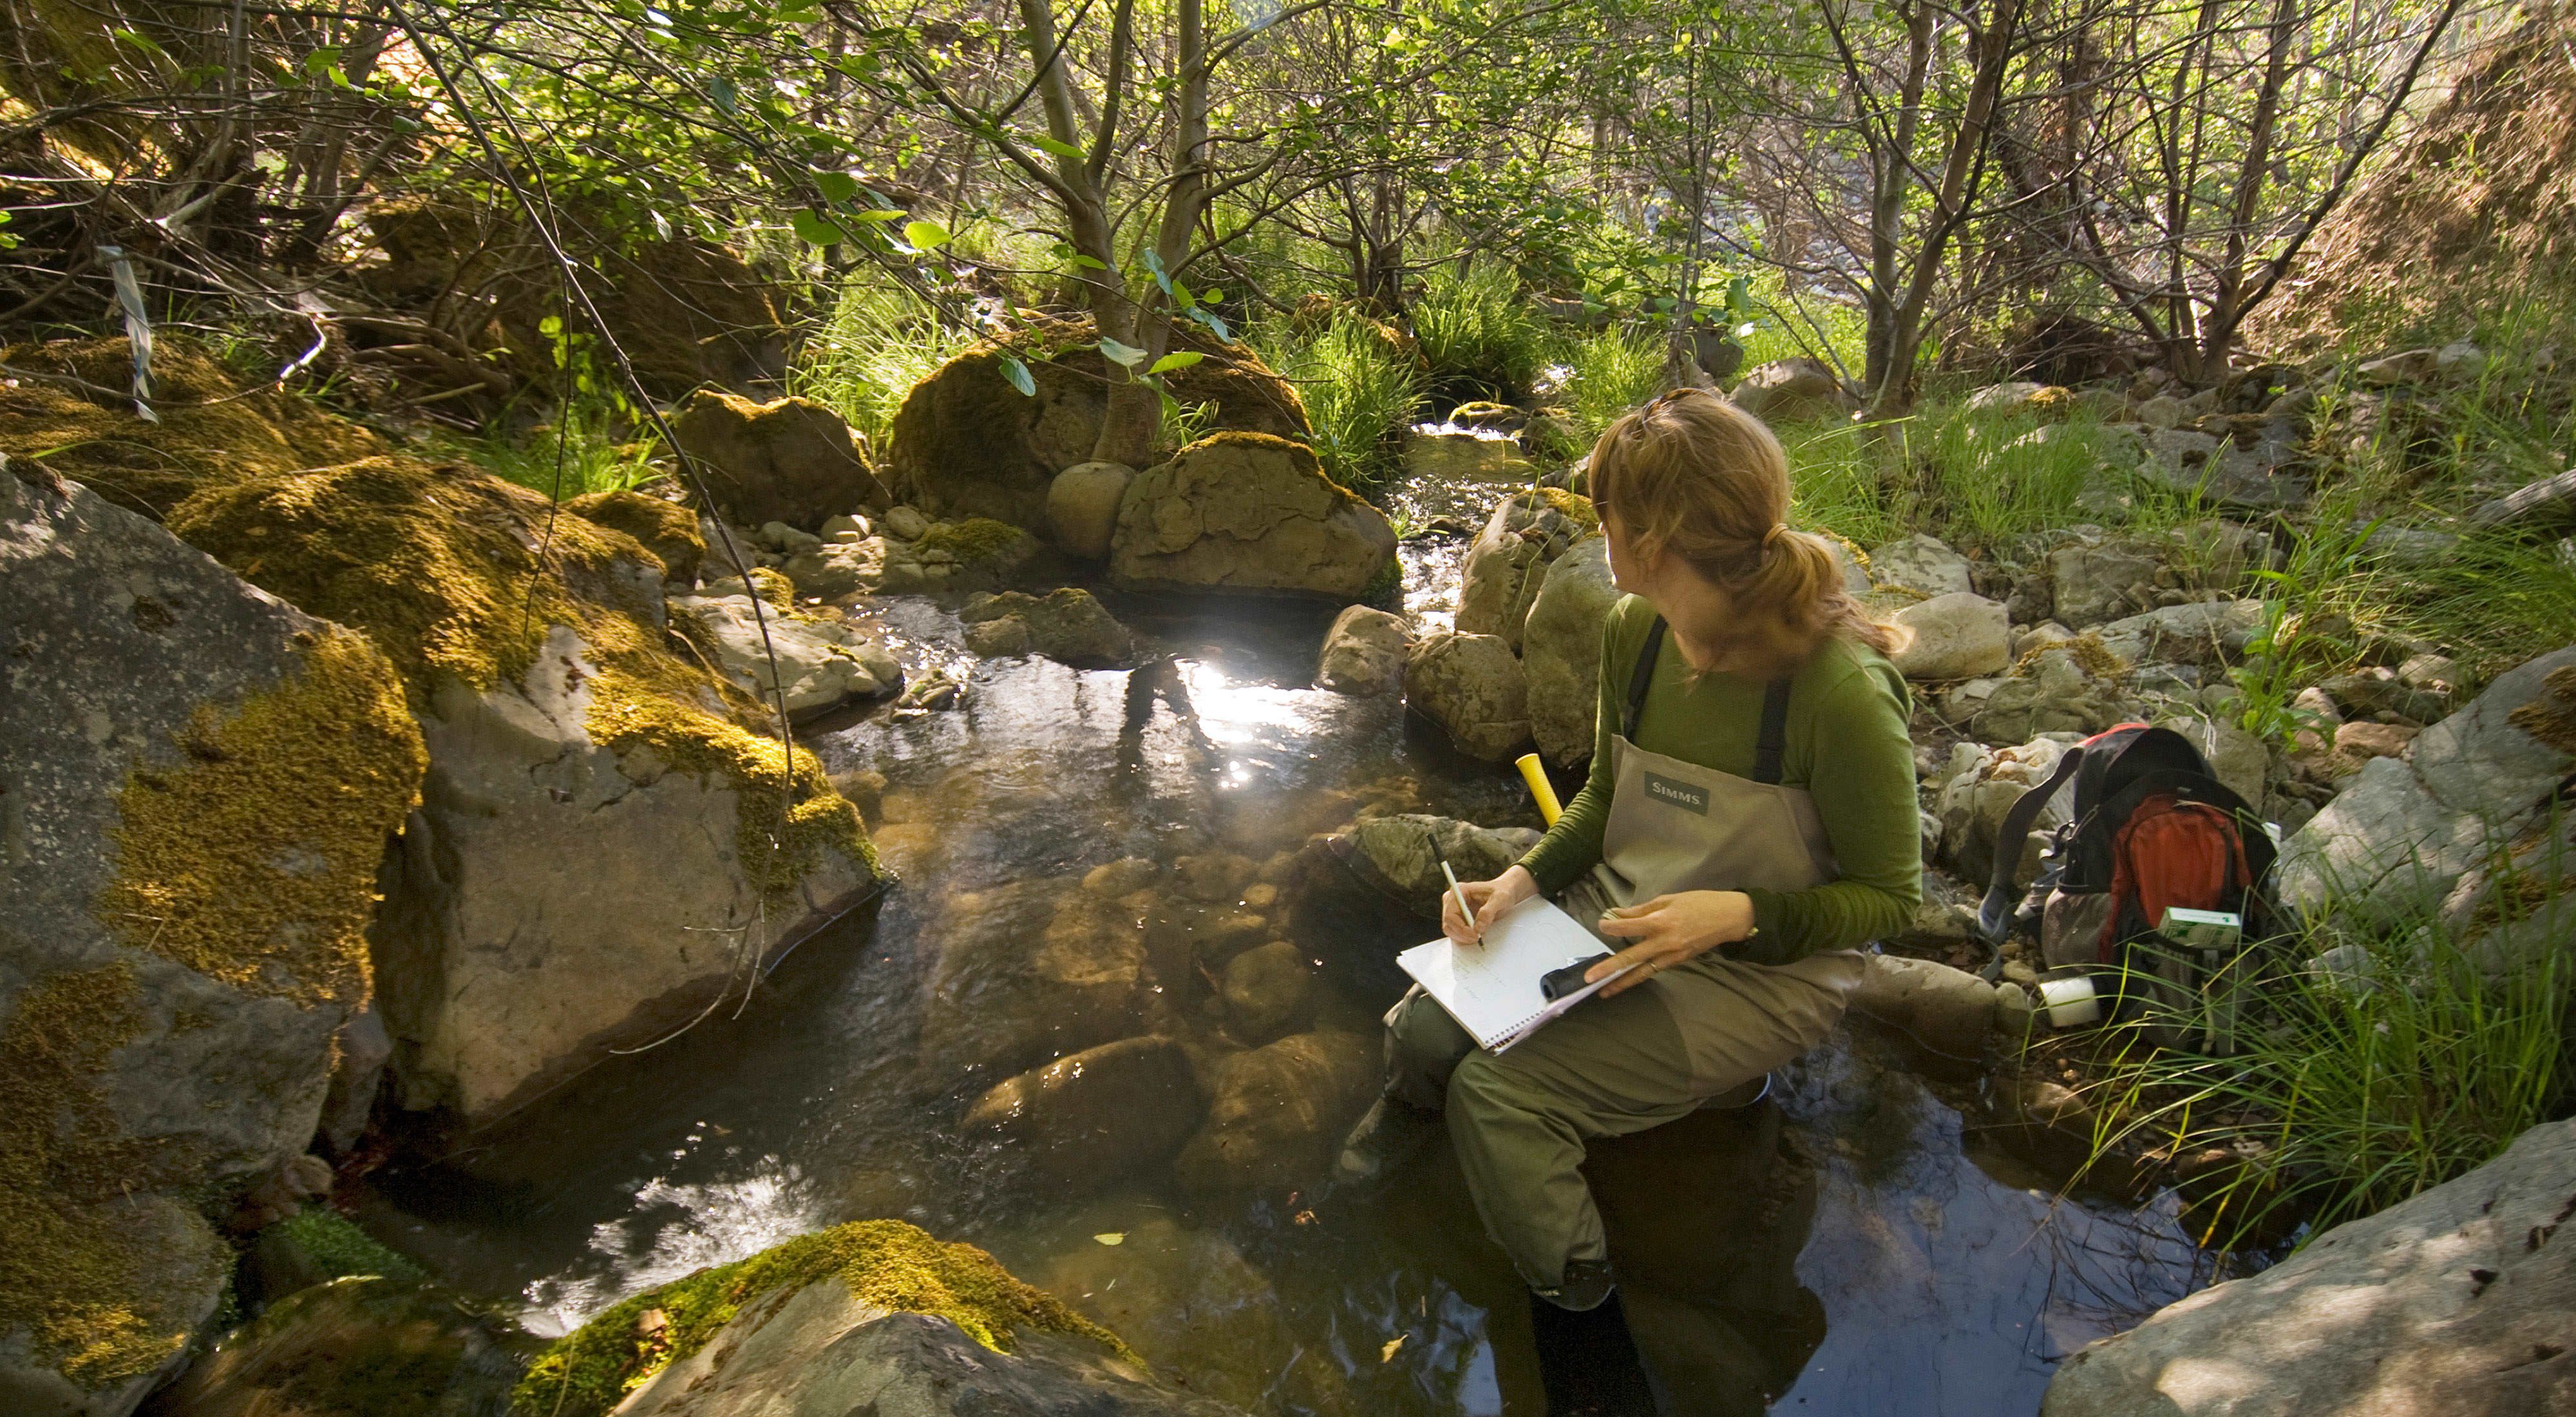 The Nature Conservancy's Applied Scientist, collecting data at various locations in the Garcia River Forest